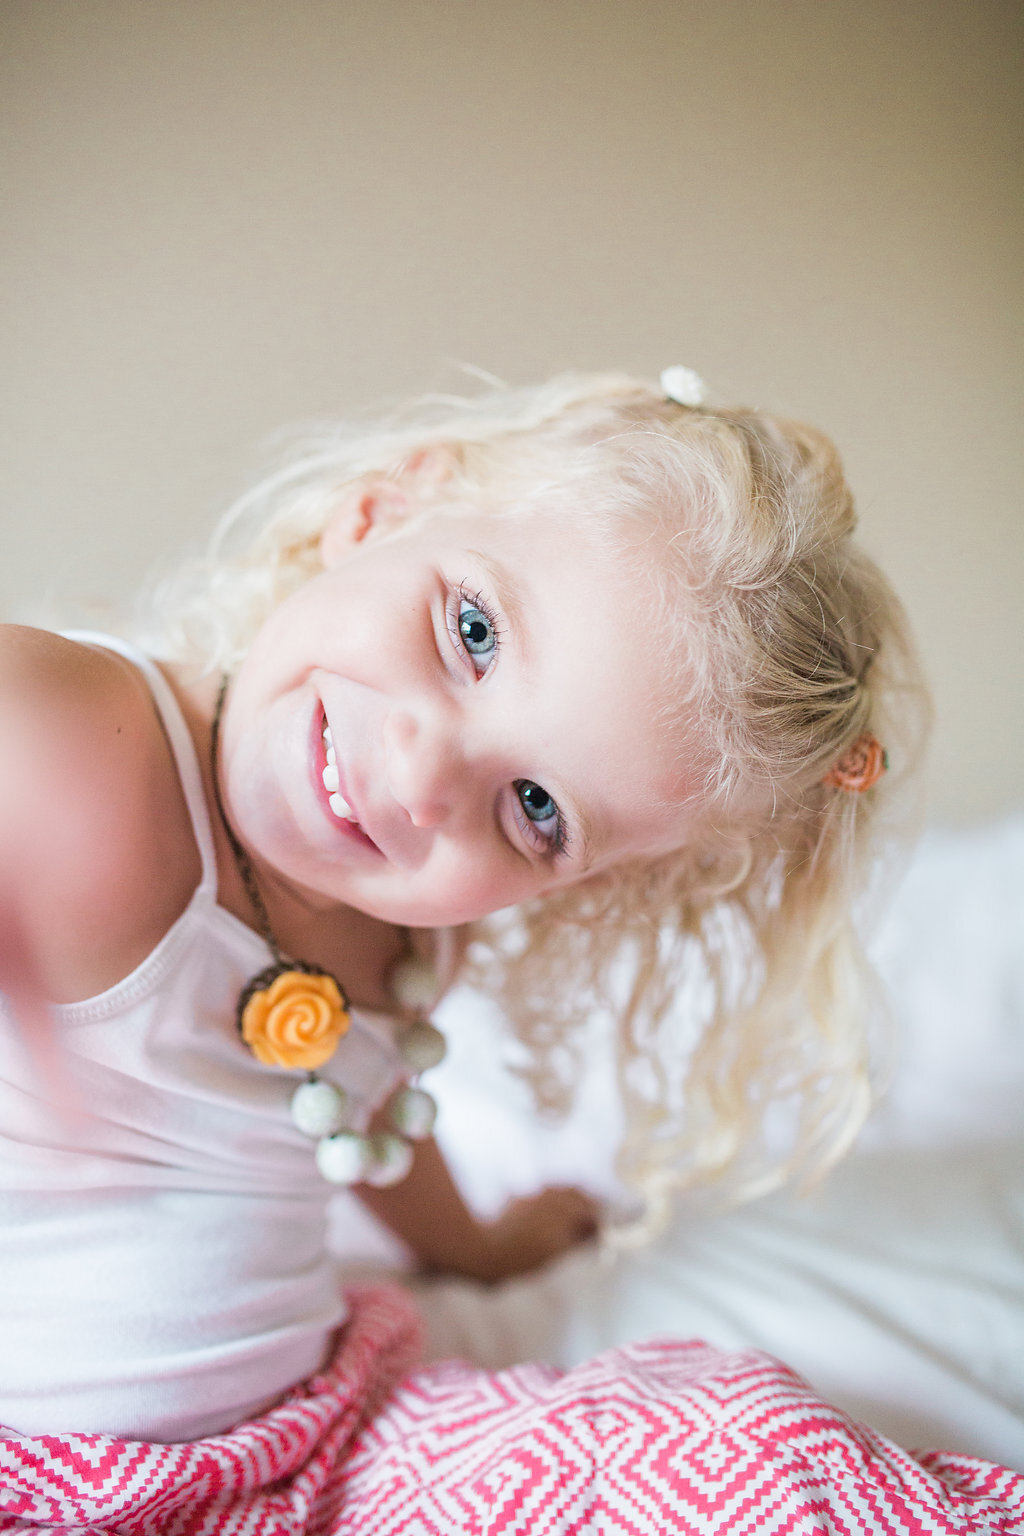 Emma+Rose+Company+_+Lifestyle+Photographer+_+Seattle+Wedding+Photographer+_+Adorably+Toddler+on+bed+_+In+Home+Lifestyle+Session+_+Family+Photography+_+Family+photo+shoot+_+Adorable+Toddler+Blonde+Curls+_+Mastin+Labs.jpeg